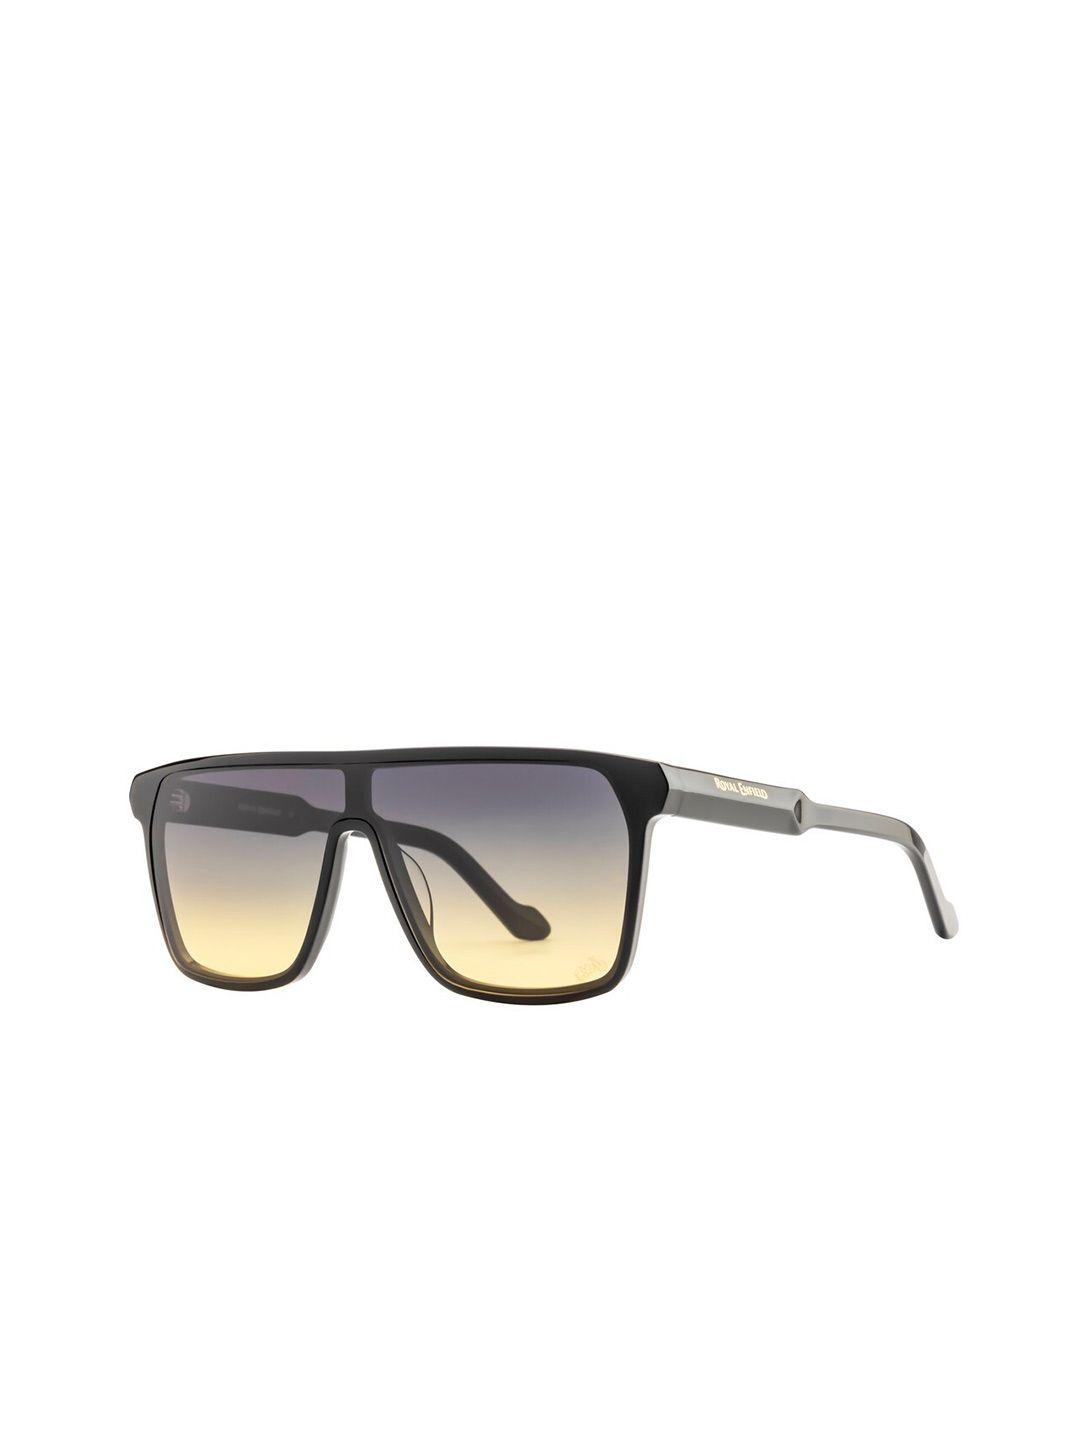 royal enfield men shield sunglasses with uv protected lens